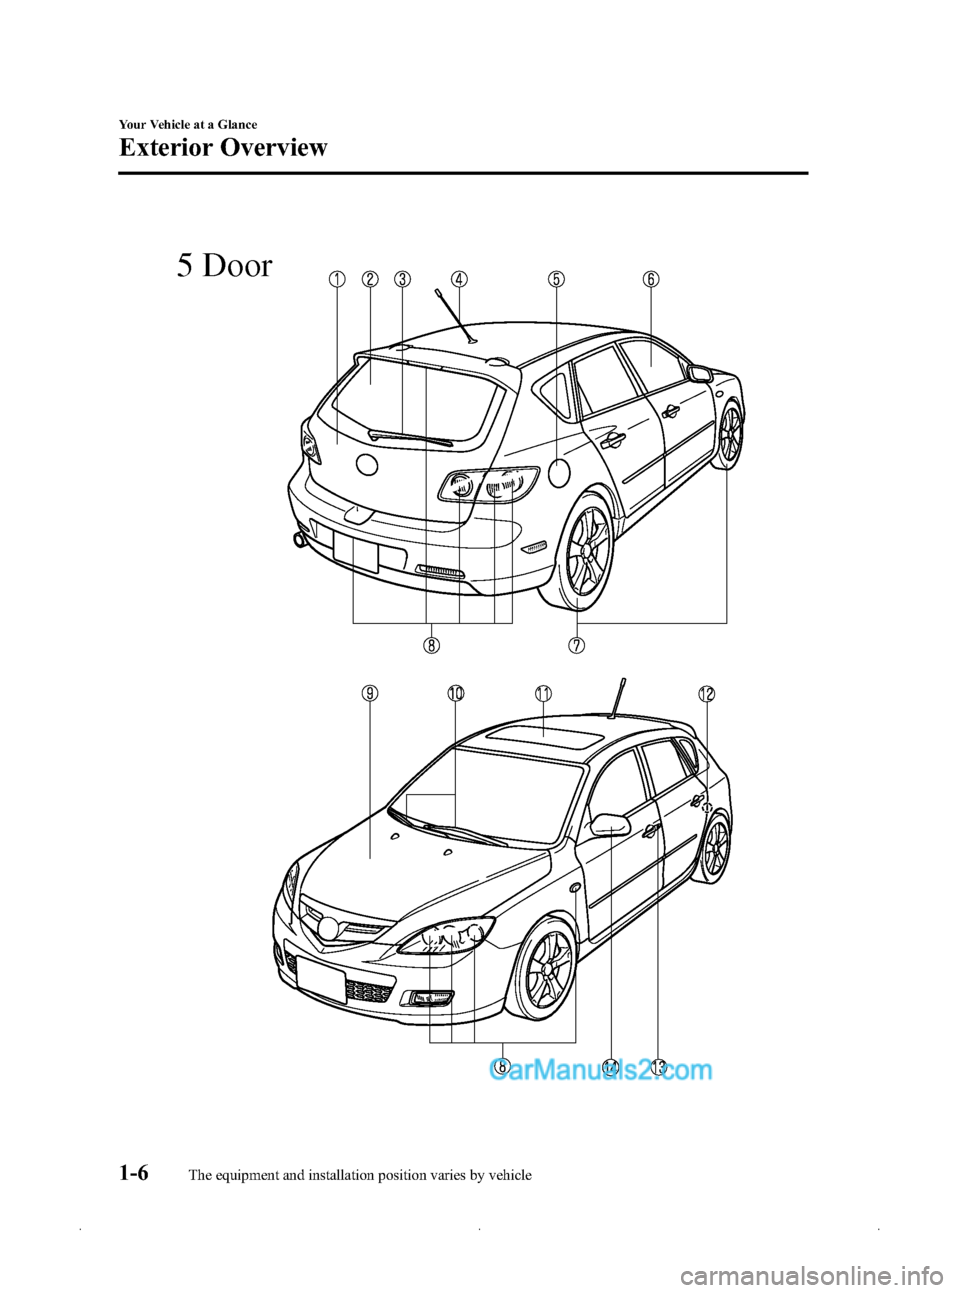 MAZDA MODEL MAZDASPEED 3 2009   (in English) User Guide Black plate (12,1)
5 Door
1-6
Your Vehicle at a Glance
The equipment and installation position varies by vehicle
Exterior Overview
Mazda3_8Z87-EA-08F_Edition1 Page12
Monday, May 19 2008 9:55 AM
Form N